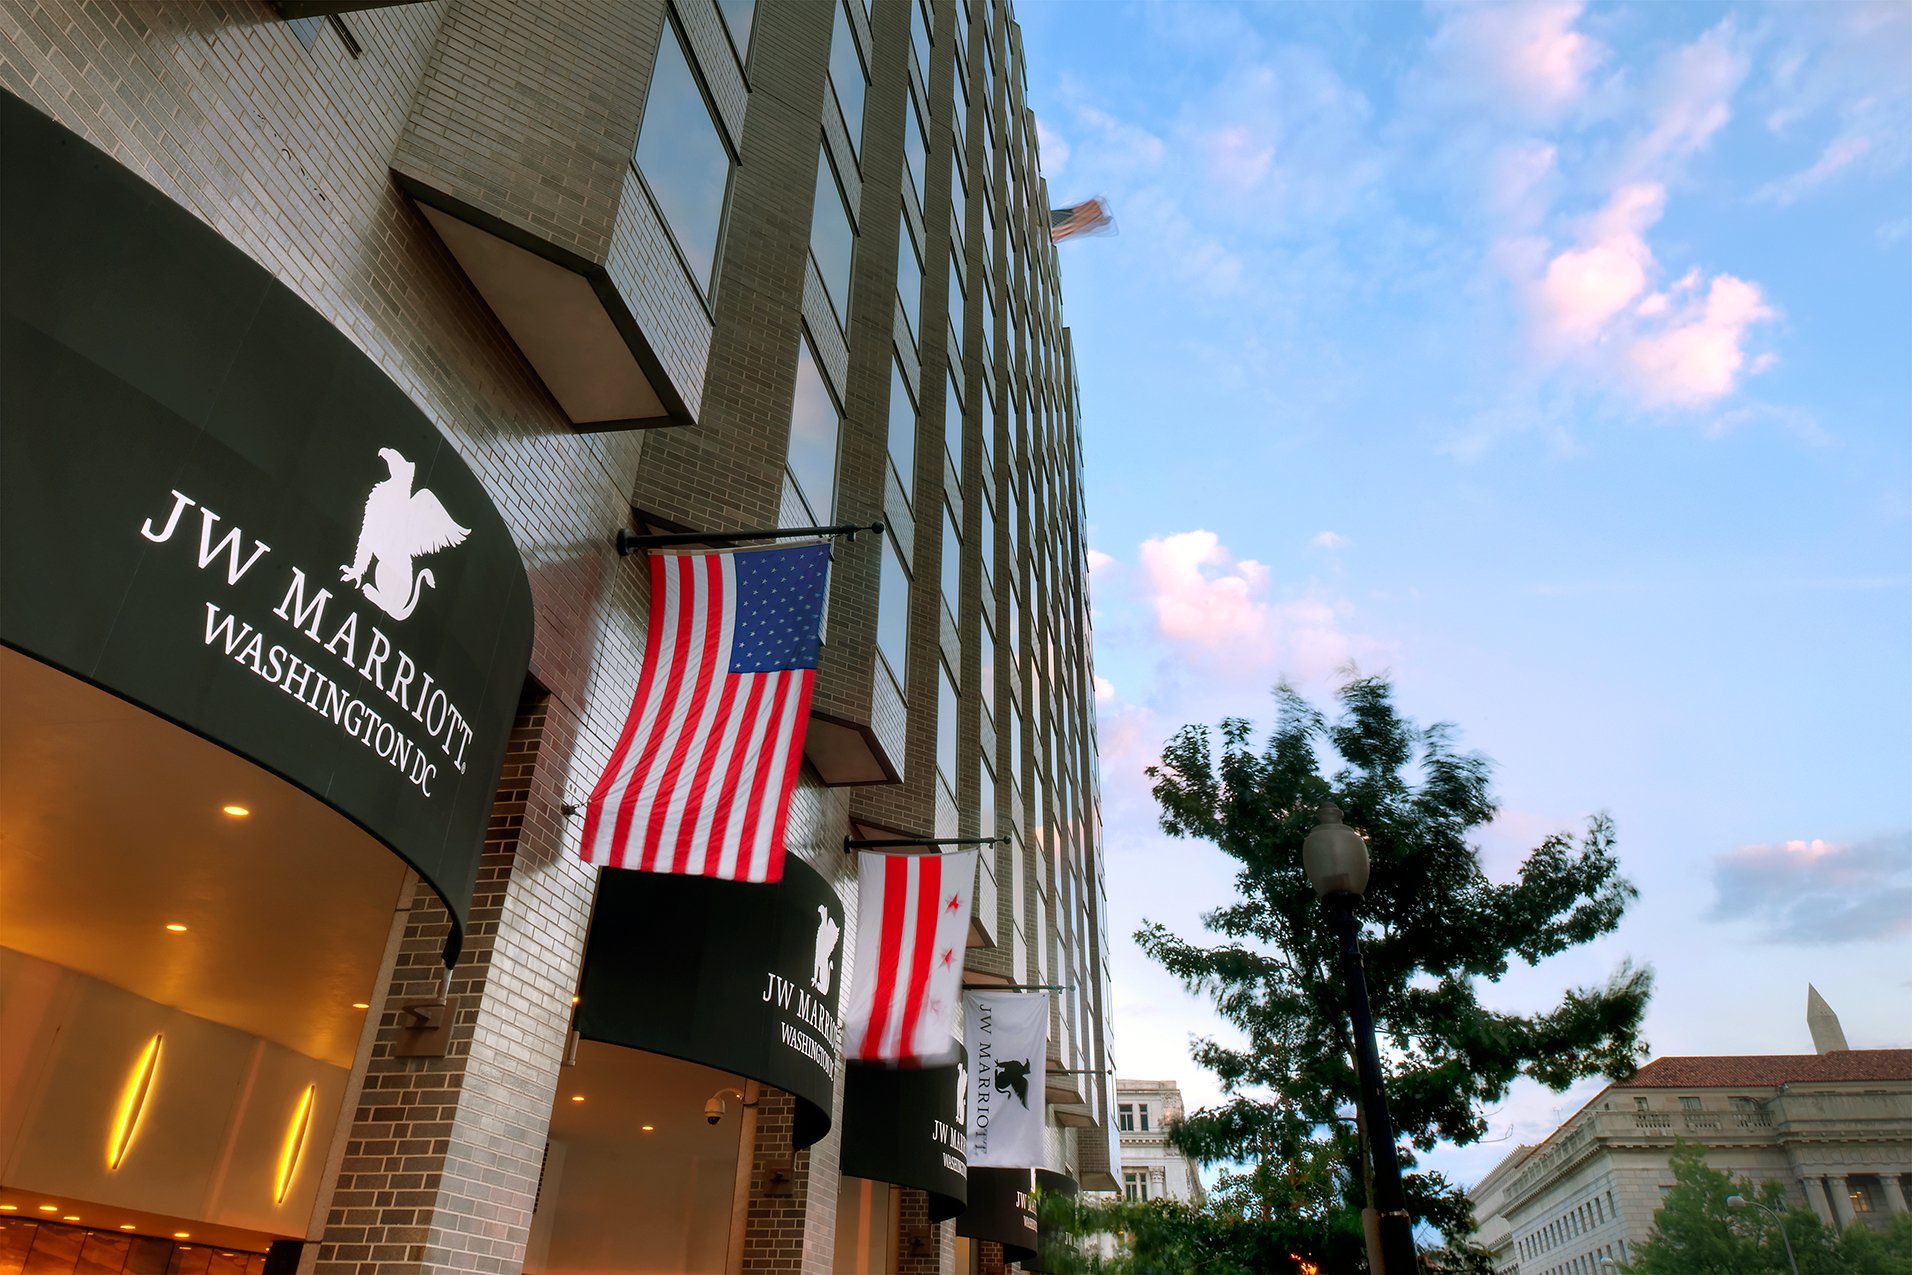 Property Profile: A Weekend at the JW Marriott Washington, DC